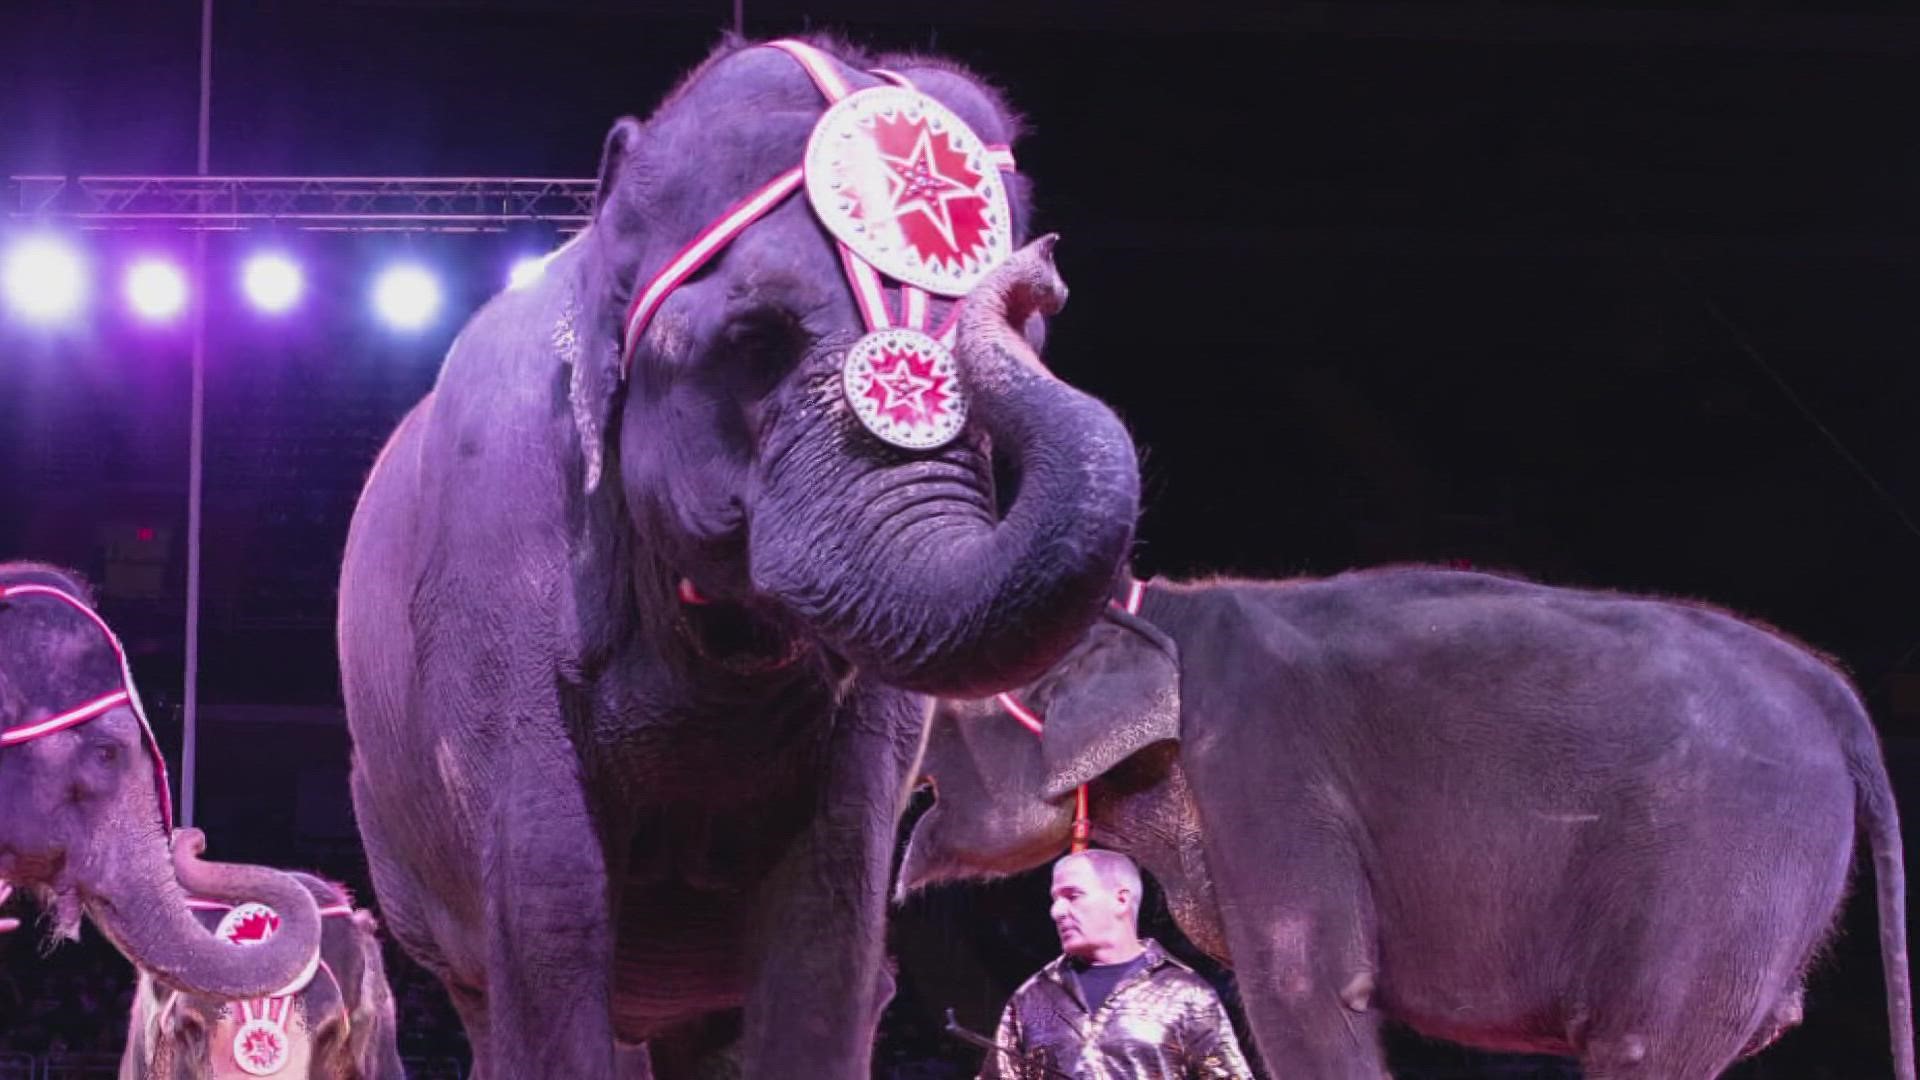 Moolah Shrine Circus is making some changes for its 81st year of entertainment in St. Louis. The circus announced Thursday the retirement of its elephants.